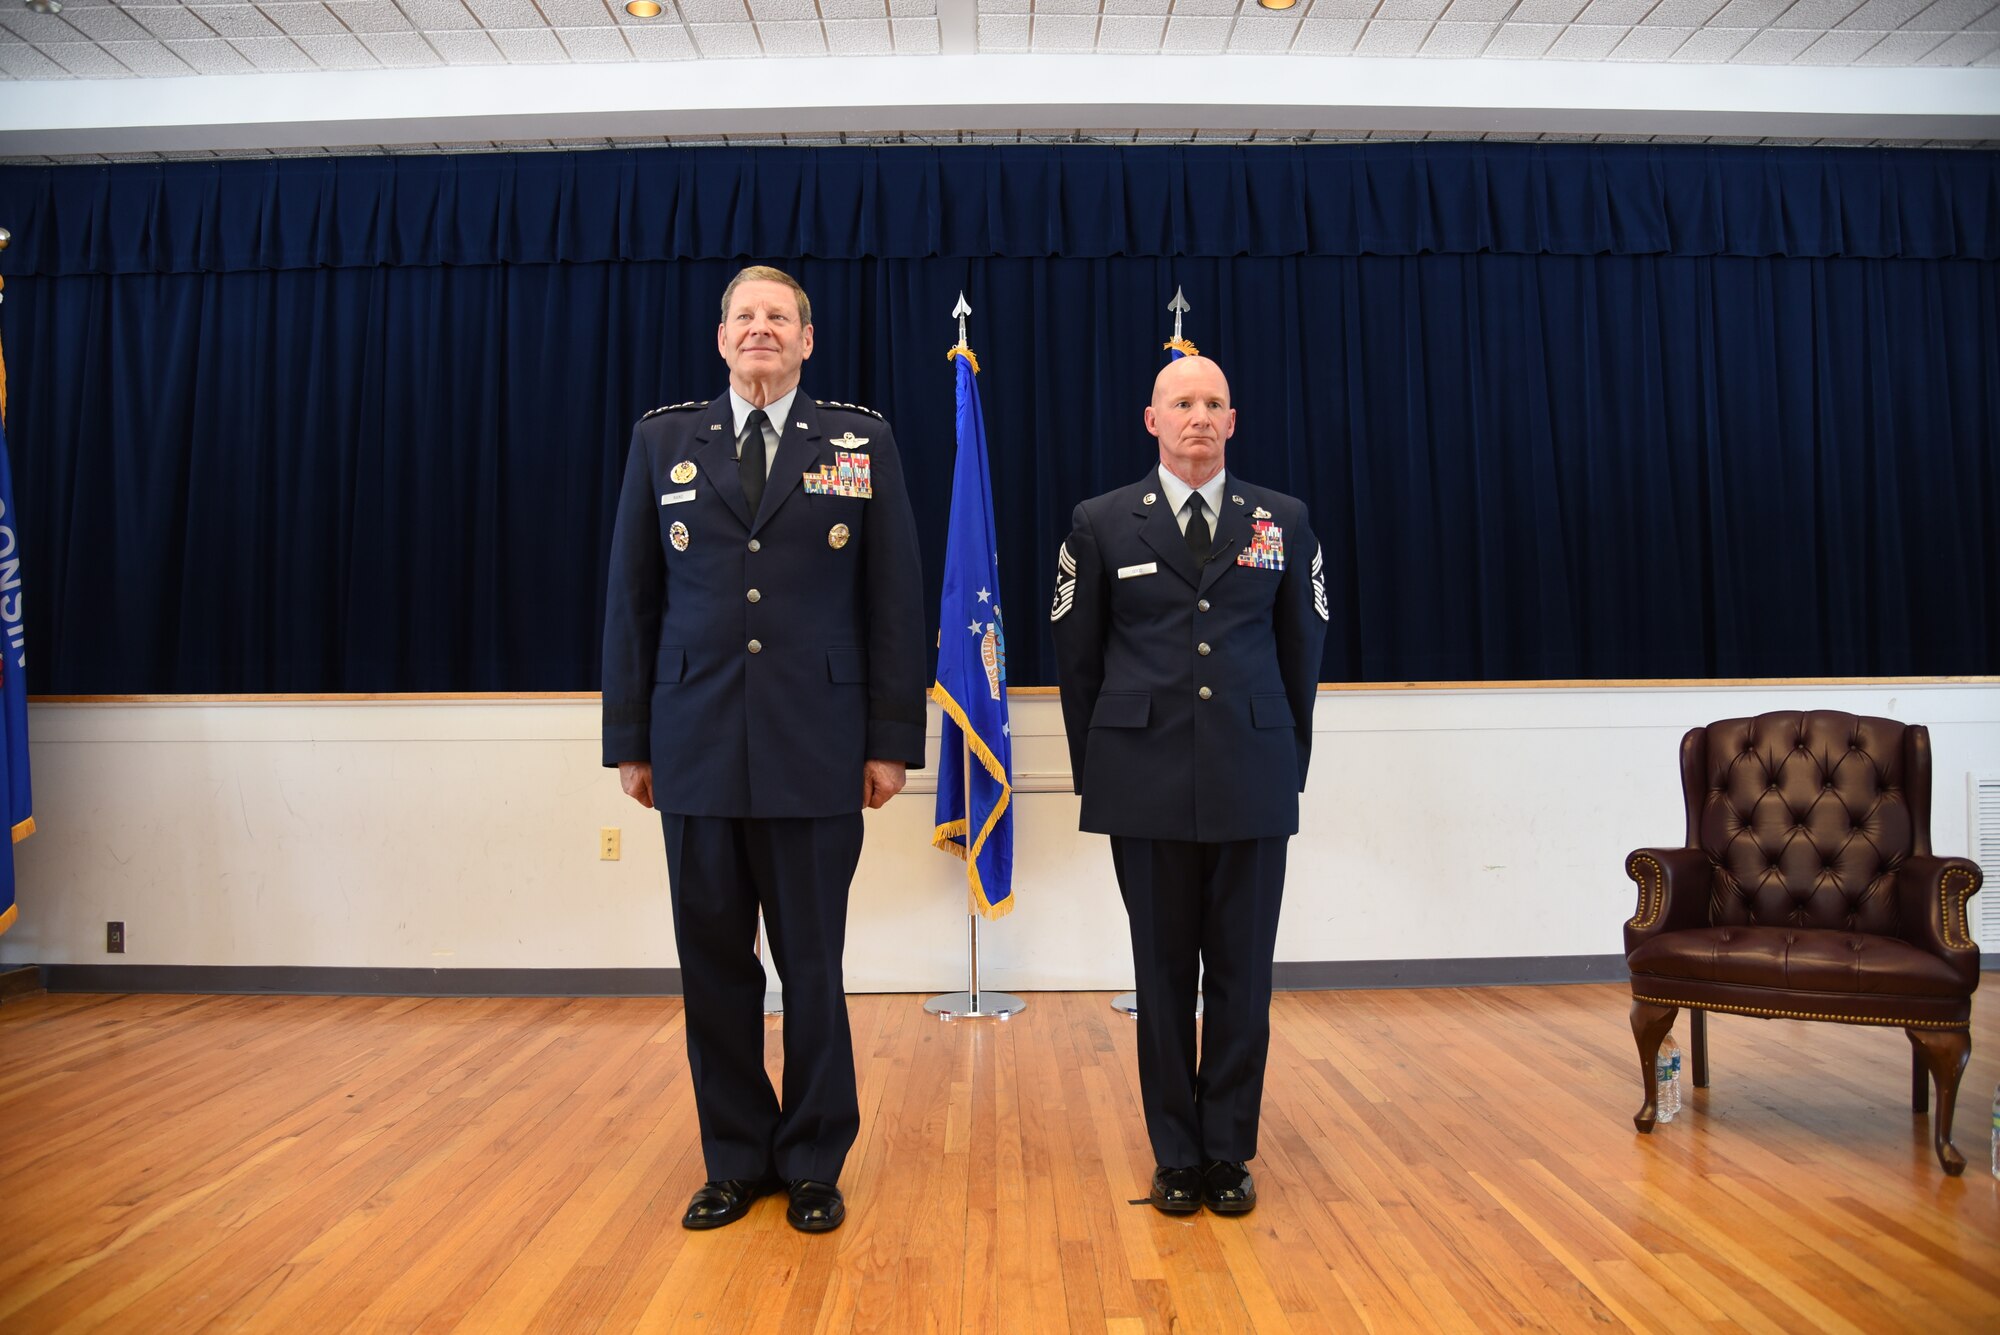 Retired Gen. Robin Rand and Chief Master Sgt. Thomas F. Good, 20th Air Force command chief, stand at attention during Chief Good's retirement ceremony March 5, 2019, at F. E. Warren Air Force Base. Chief Good retired as the 20th Air Force command chief in the presence of his wife, children and friends. (U.S. Air Force photo by Senior Airman Nicole Reed)